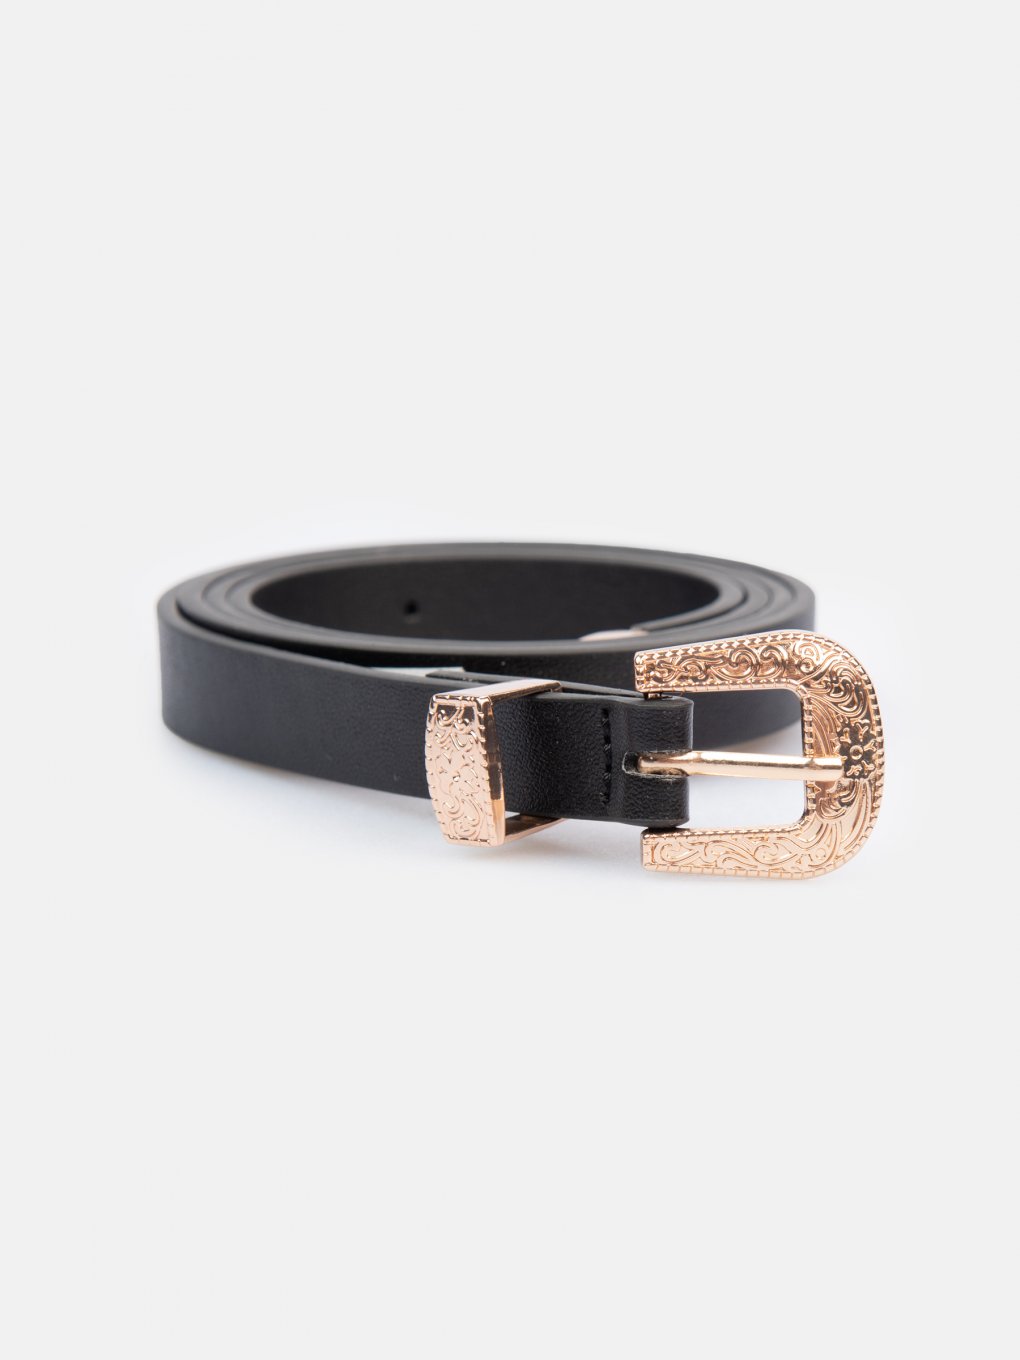 Narrow belt with gold buckle